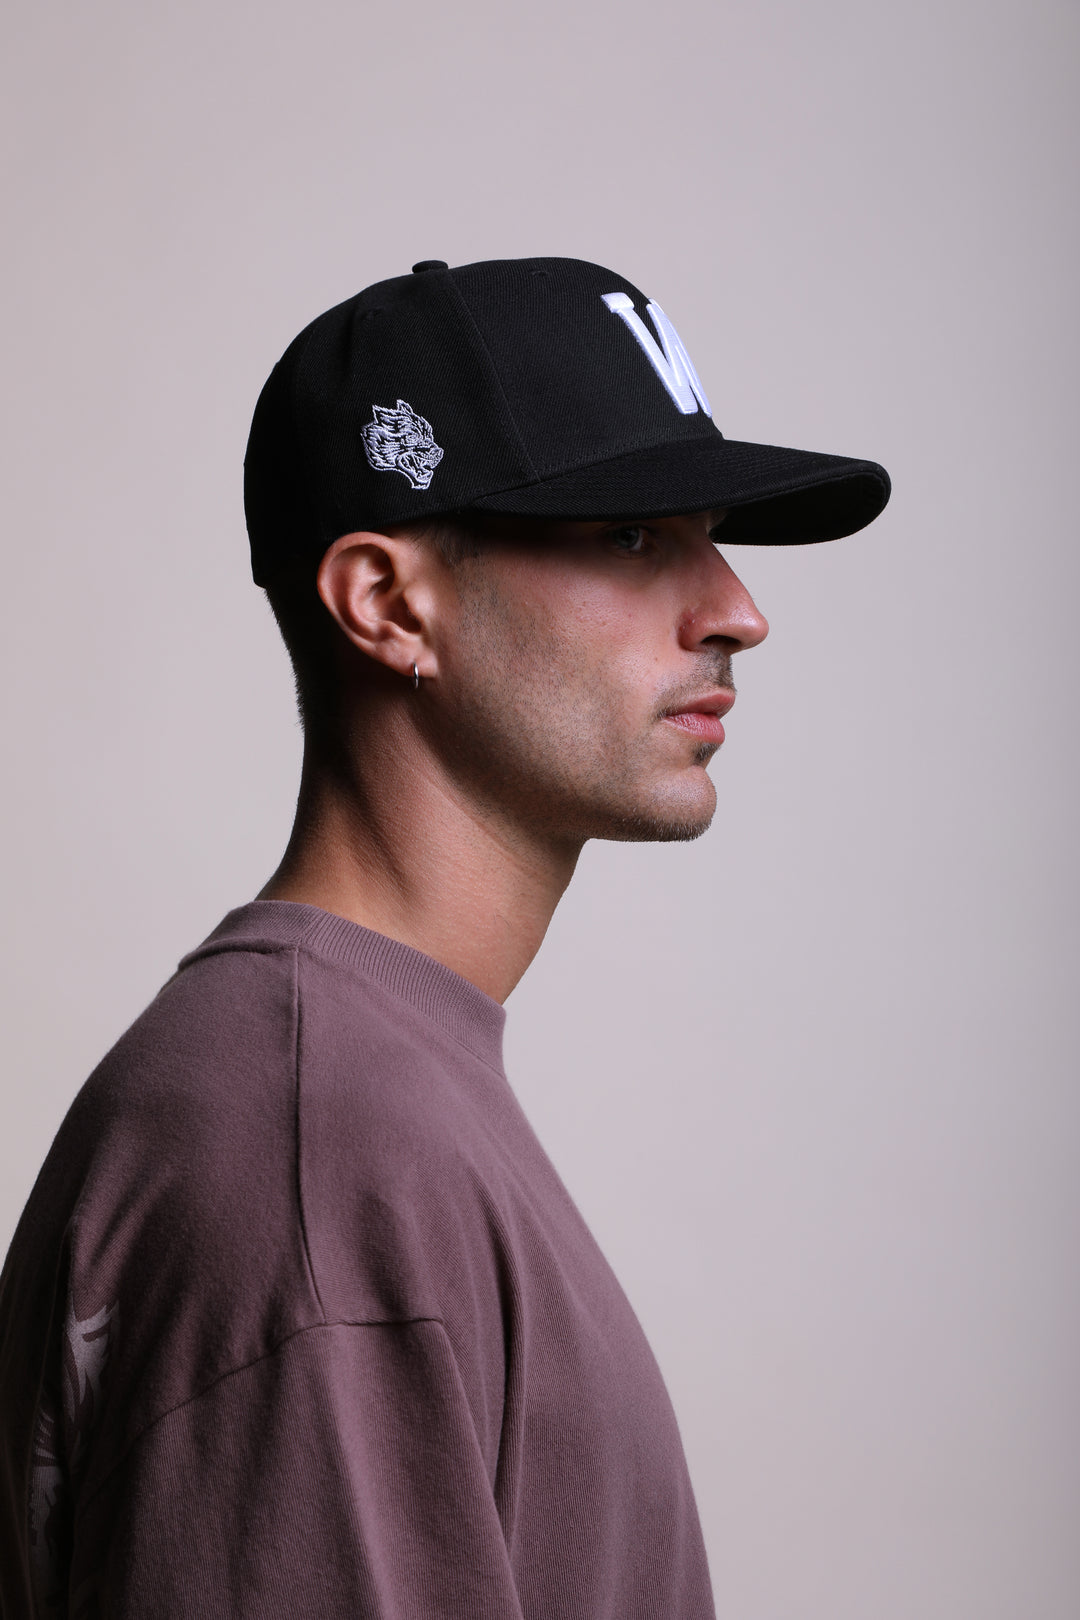 Iron "W" Fitted Hat in Black